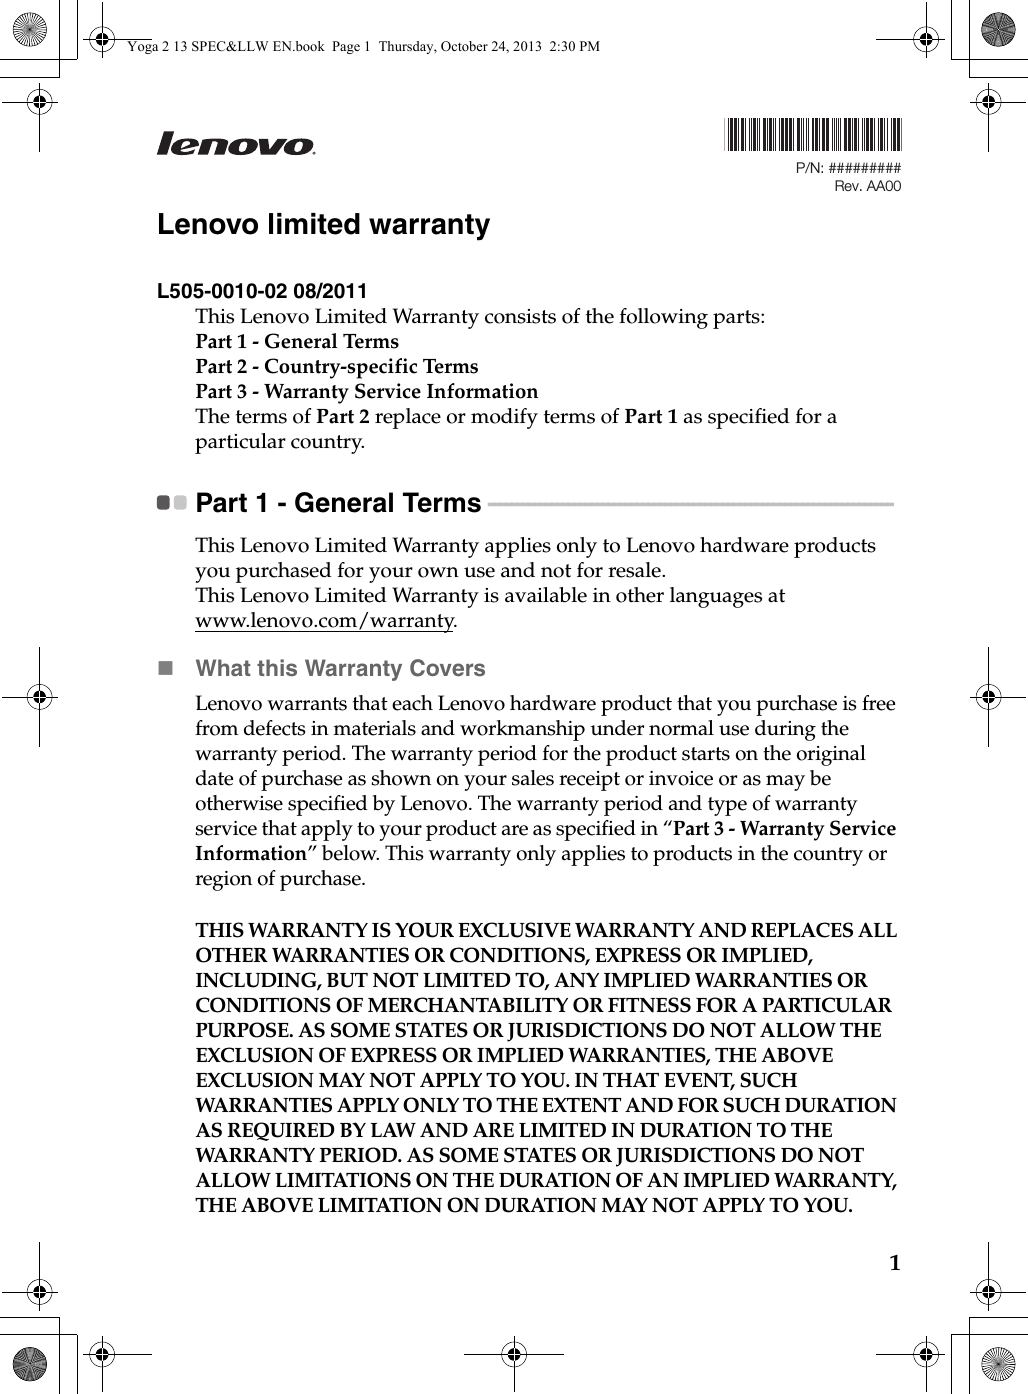 1Lenovo limited warrantyL505-0010-02 08/2011This Lenovo Limited Warranty consists of the following parts:Part 1 - General TermsPart 2 - Country-specific Terms Part 3 - Warranty Service Information The terms of Part 2 replace or modify terms of Part 1 as specified for a particular country.Part 1 - General Terms  - - - - - - - - - - - - - - - - - - - - - - - - - - - - - - - - - - - - - - - - - - - - - - - - - - - - - - - - - - - - - - - - - - - - - - - This Lenovo Limited Warranty applies only to Lenovo hardware products you purchased for your own use and not for resale.This Lenovo Limited Warranty is available in other languages at www.lenovo.com/warranty.What this Warranty CoversLenovo warrants that each Lenovo hardware product that you purchase is free from defects in materials and workmanship under normal use during the warranty period. The warranty period for the product starts on the original date of purchase as shown on your sales receipt or invoice or as may be otherwise specified by Lenovo. The warranty period and type of warranty service that apply to your product are as specified in “Part 3 - Warranty Service Information” below. This warranty only applies to products in the country or region of purchase.THIS WARRANTY IS YOUR EXCLUSIVE WARRANTY AND REPLACES ALL OTHER WARRANTIES OR CONDITIONS, EXPRESS OR IMPLIED, INCLUDING, BUT NOT LIMITED TO, ANY IMPLIED WARRANTIES OR CONDITIONS OF MERCHANTABILITY OR FITNESS FOR A PARTICULAR PURPOSE. AS SOME STATES OR JURISDICTIONS DO NOT ALLOW THE EXCLUSION OF EXPRESS OR IMPLIED WARRANTIES, THE ABOVE EXCLUSION MAY NOT APPLY TO YOU. IN THAT EVENT, SUCH WARRANTIES APPLY ONLY TO THE EXTENT AND FOR SUCH DURATION AS REQUIRED BY LAW AND ARE LIMITED IN DURATION TO THE WARRANTY PERIOD. AS SOME STATES OR JURISDICTIONS DO NOT ALLOW LIMITATIONS ON THE DURATION OF AN IMPLIED WARRANTY, THE ABOVE LIMITATION ON DURATION MAY NOT APPLY TO YOU.P/N: #########Rev. AA00Yoga 2 13 SPEC&amp;LLW EN.book  Page 1  Thursday, October 24, 2013  2:30 PM